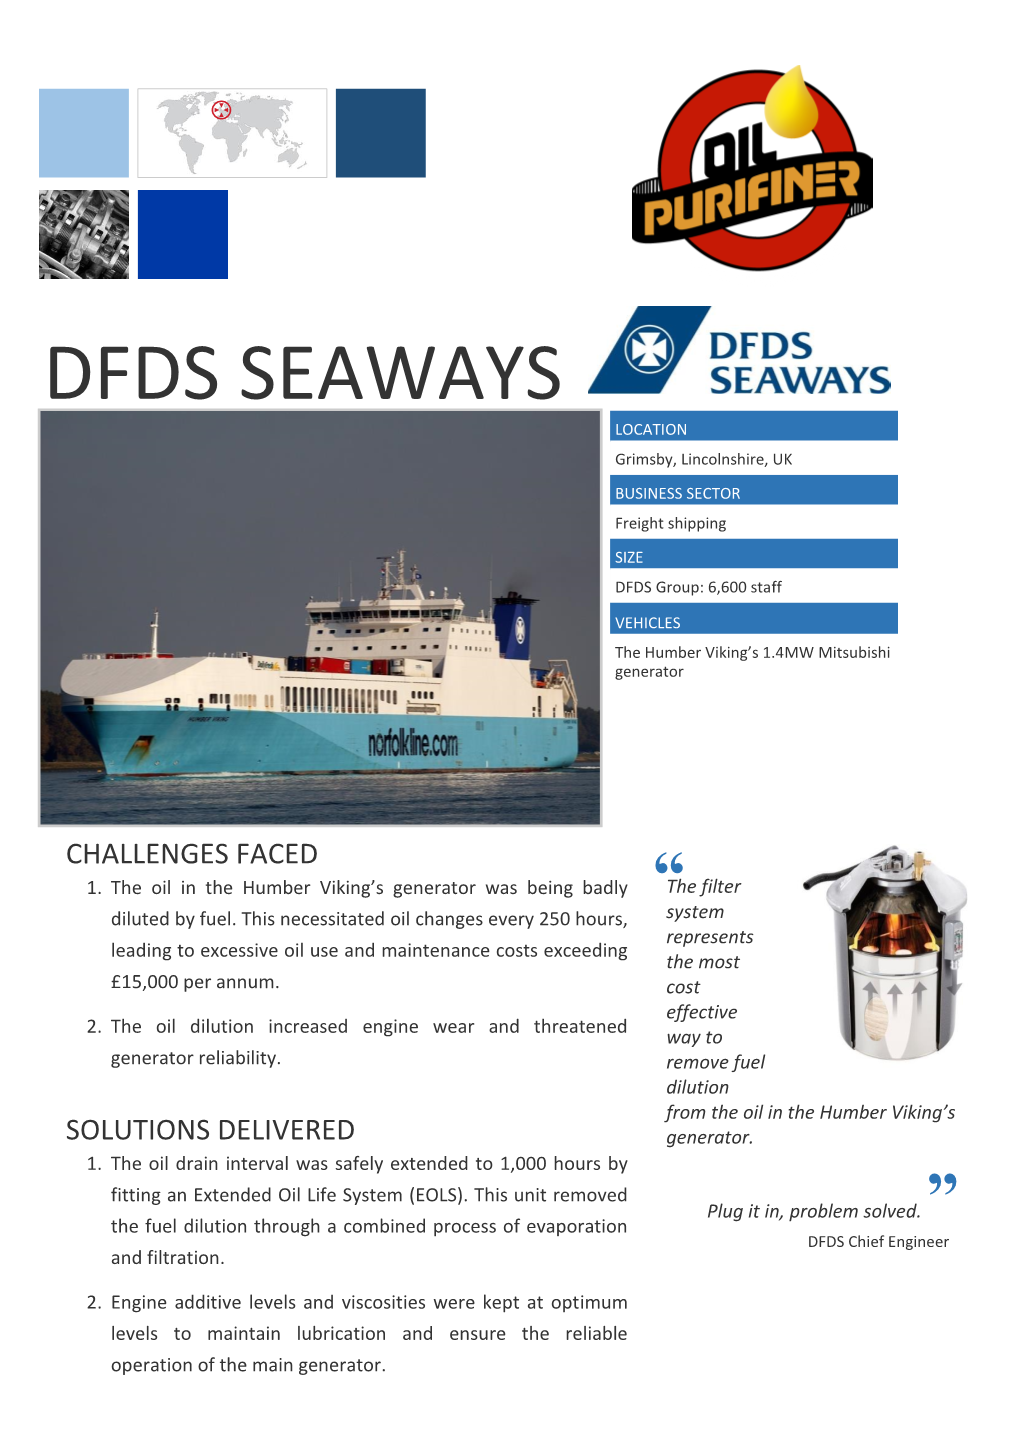 DFDS SEAWAYS LOCATION Grimsby, Lincolnshire, UK BUSINESS SECTOR Freight Shipping SIZE DFDS Group: 6,600 Staff VEHICLES the Humber Viking’S 1.4MW Mitsubishi Generator